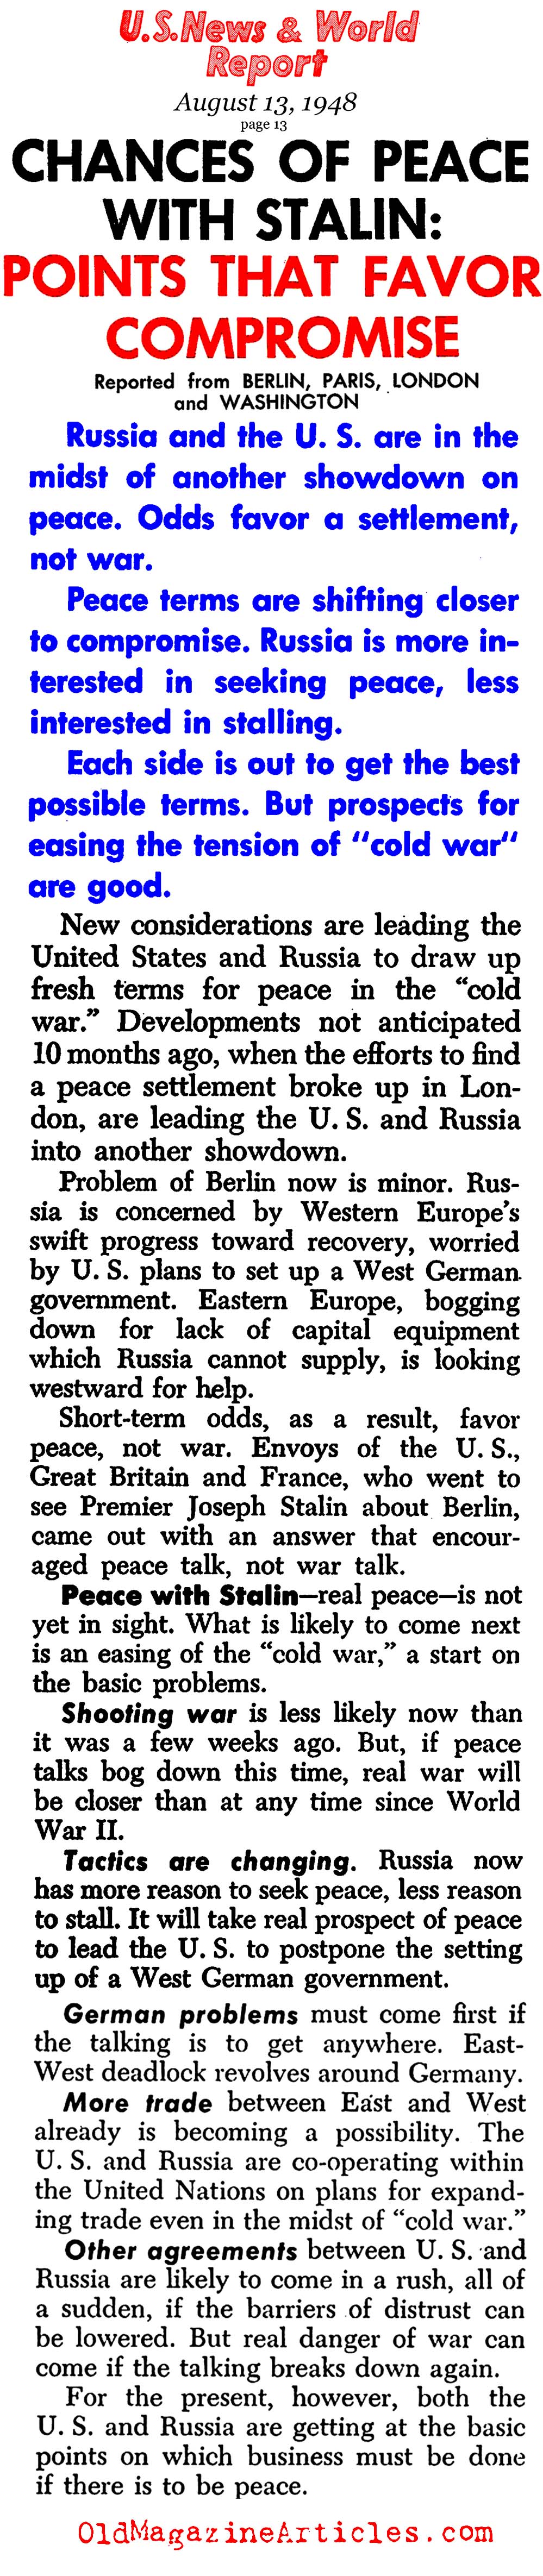 Can There be Peace with Stalin? (United States News & World Report, 1948)